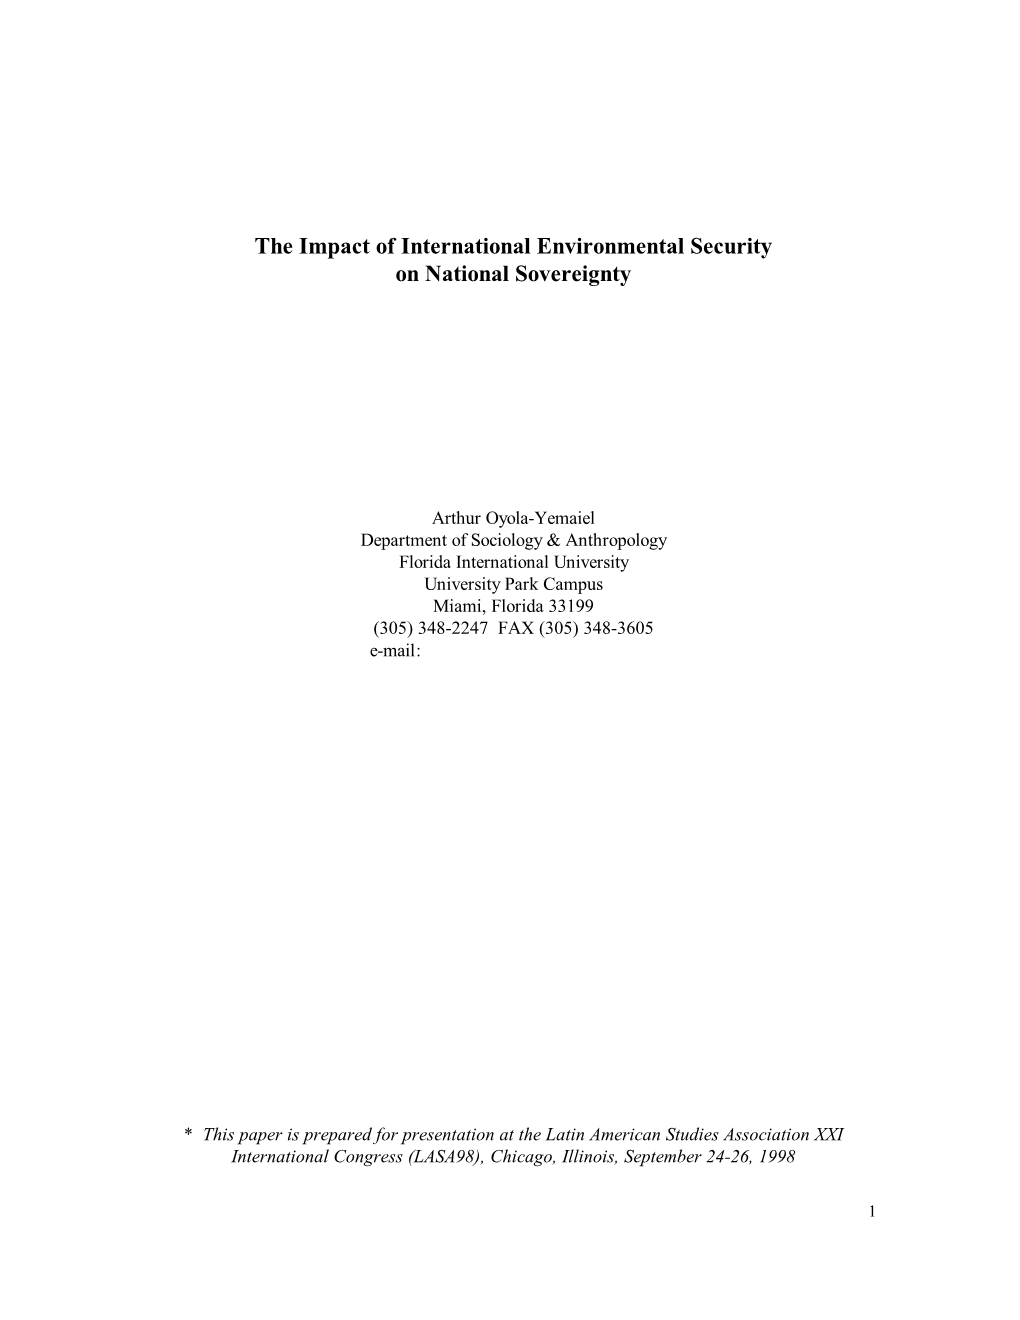 The Impact of International Environmental Security on National Sovereignty